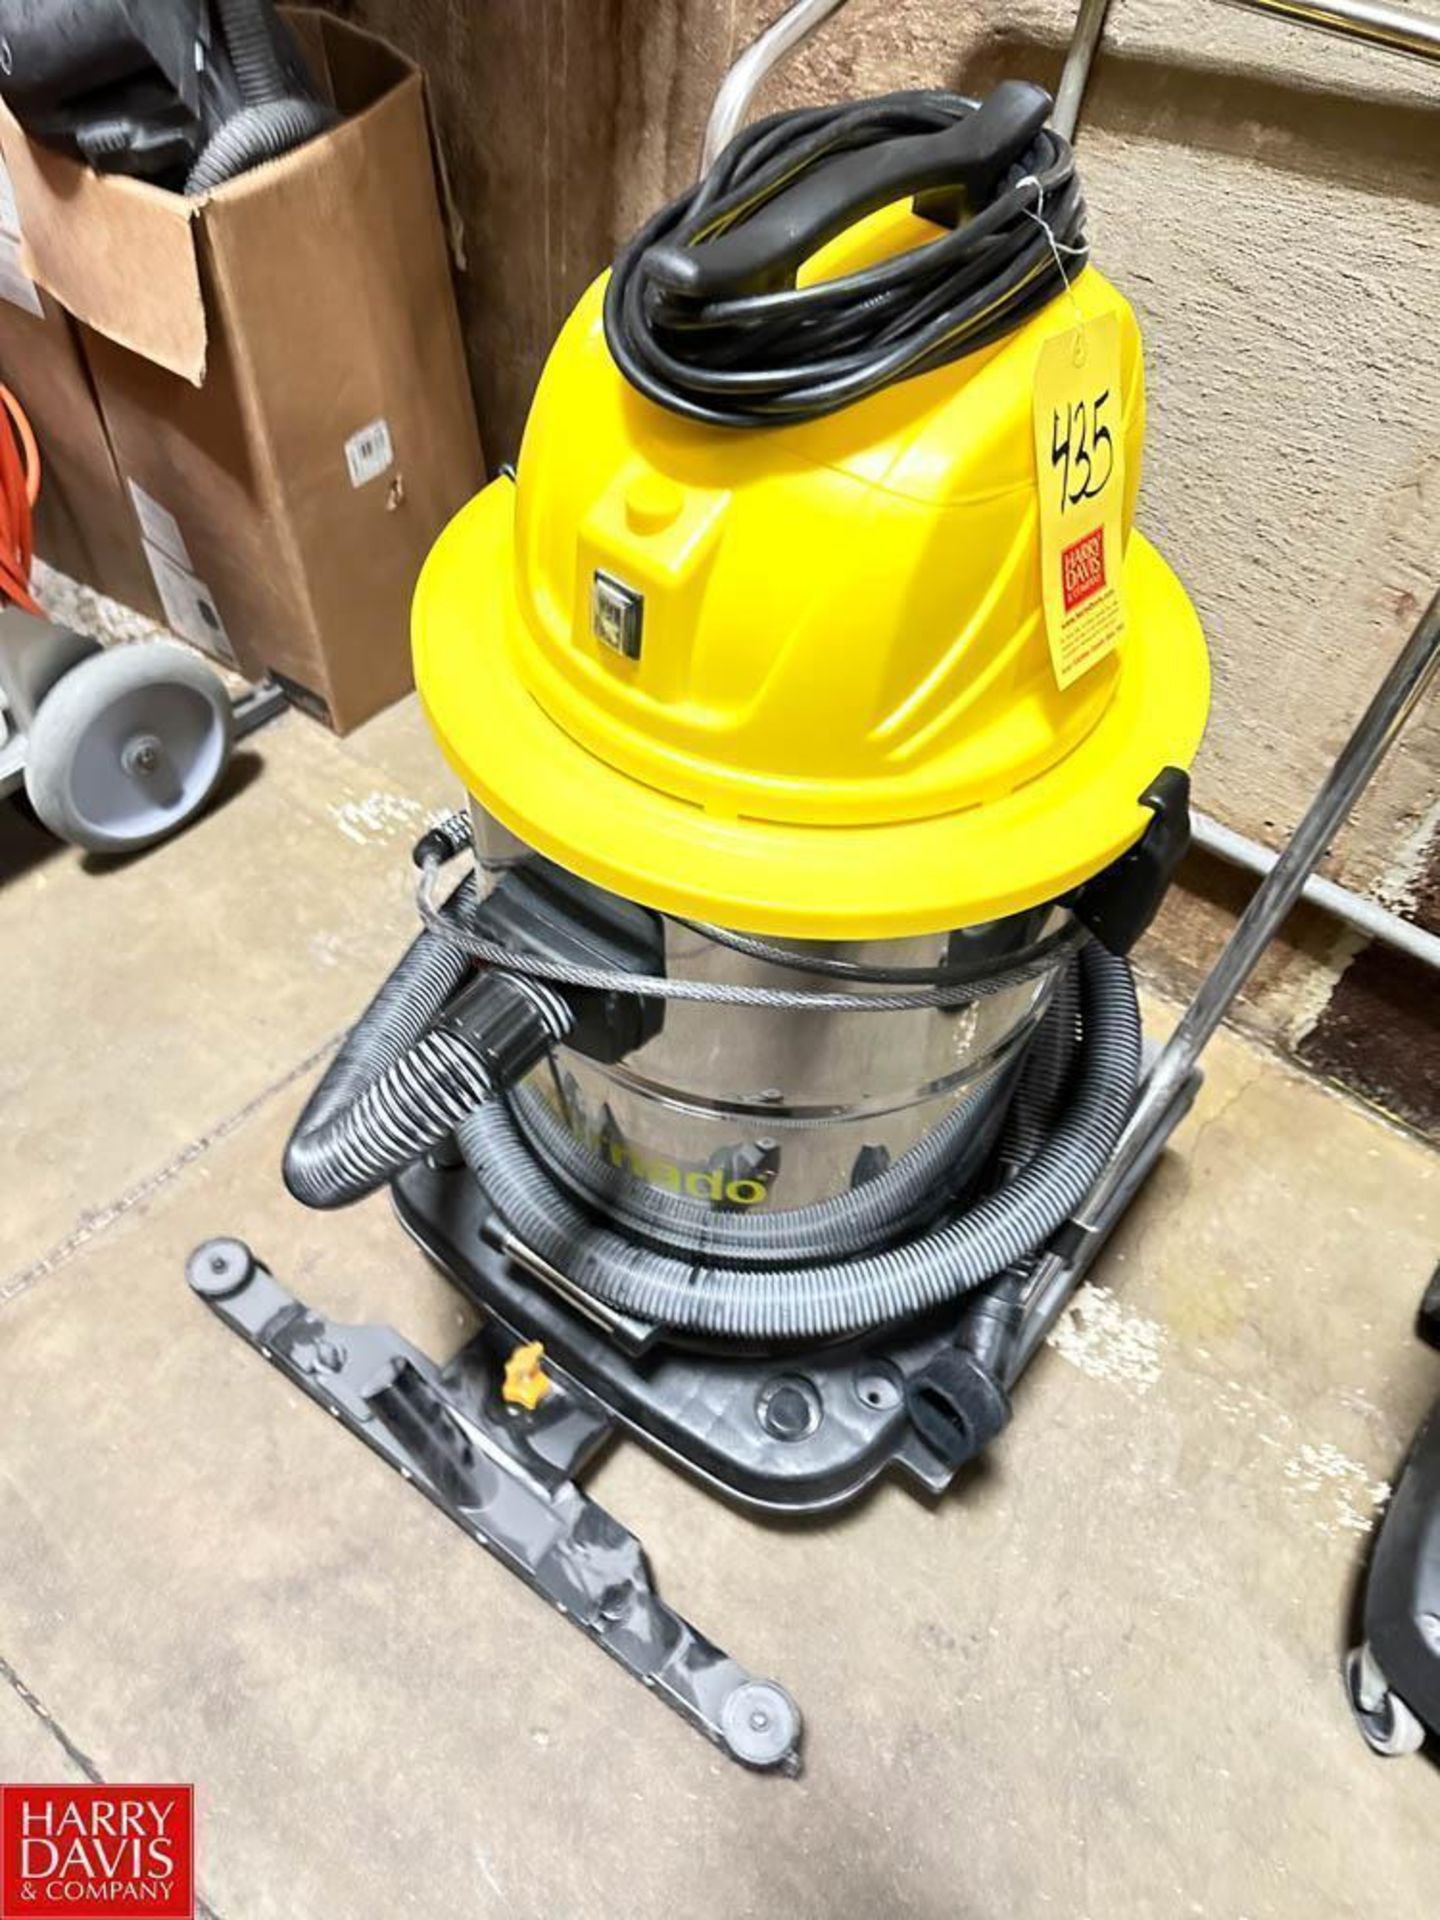 Tornado Wet/Dry Vacuum with Scrubber and Attachments - Rigging Fee: $35 - Image 2 of 2